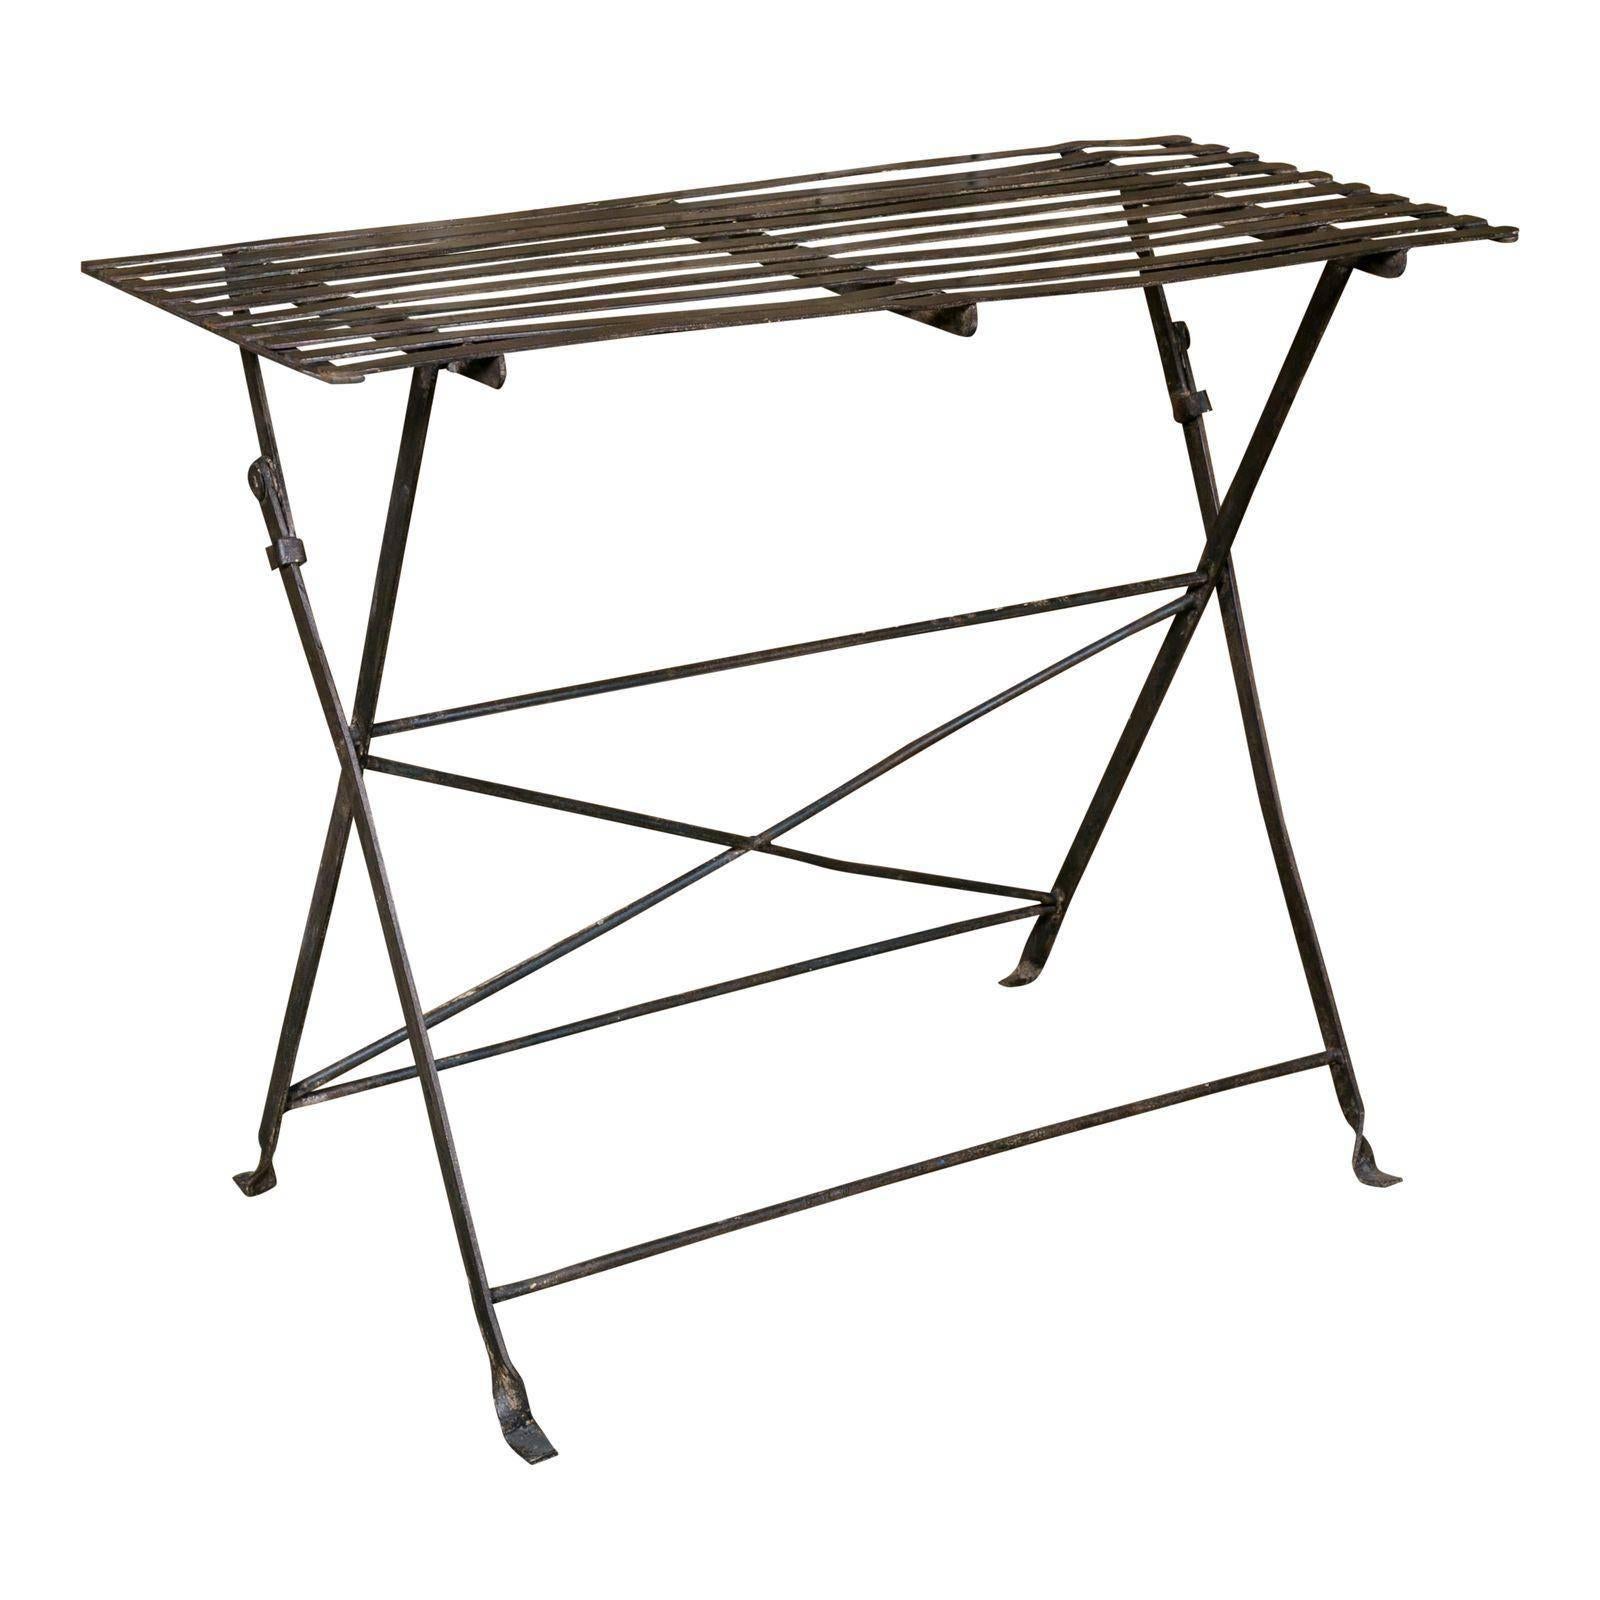 French Iron Folding Table with Metal Slat Top, circa 1920